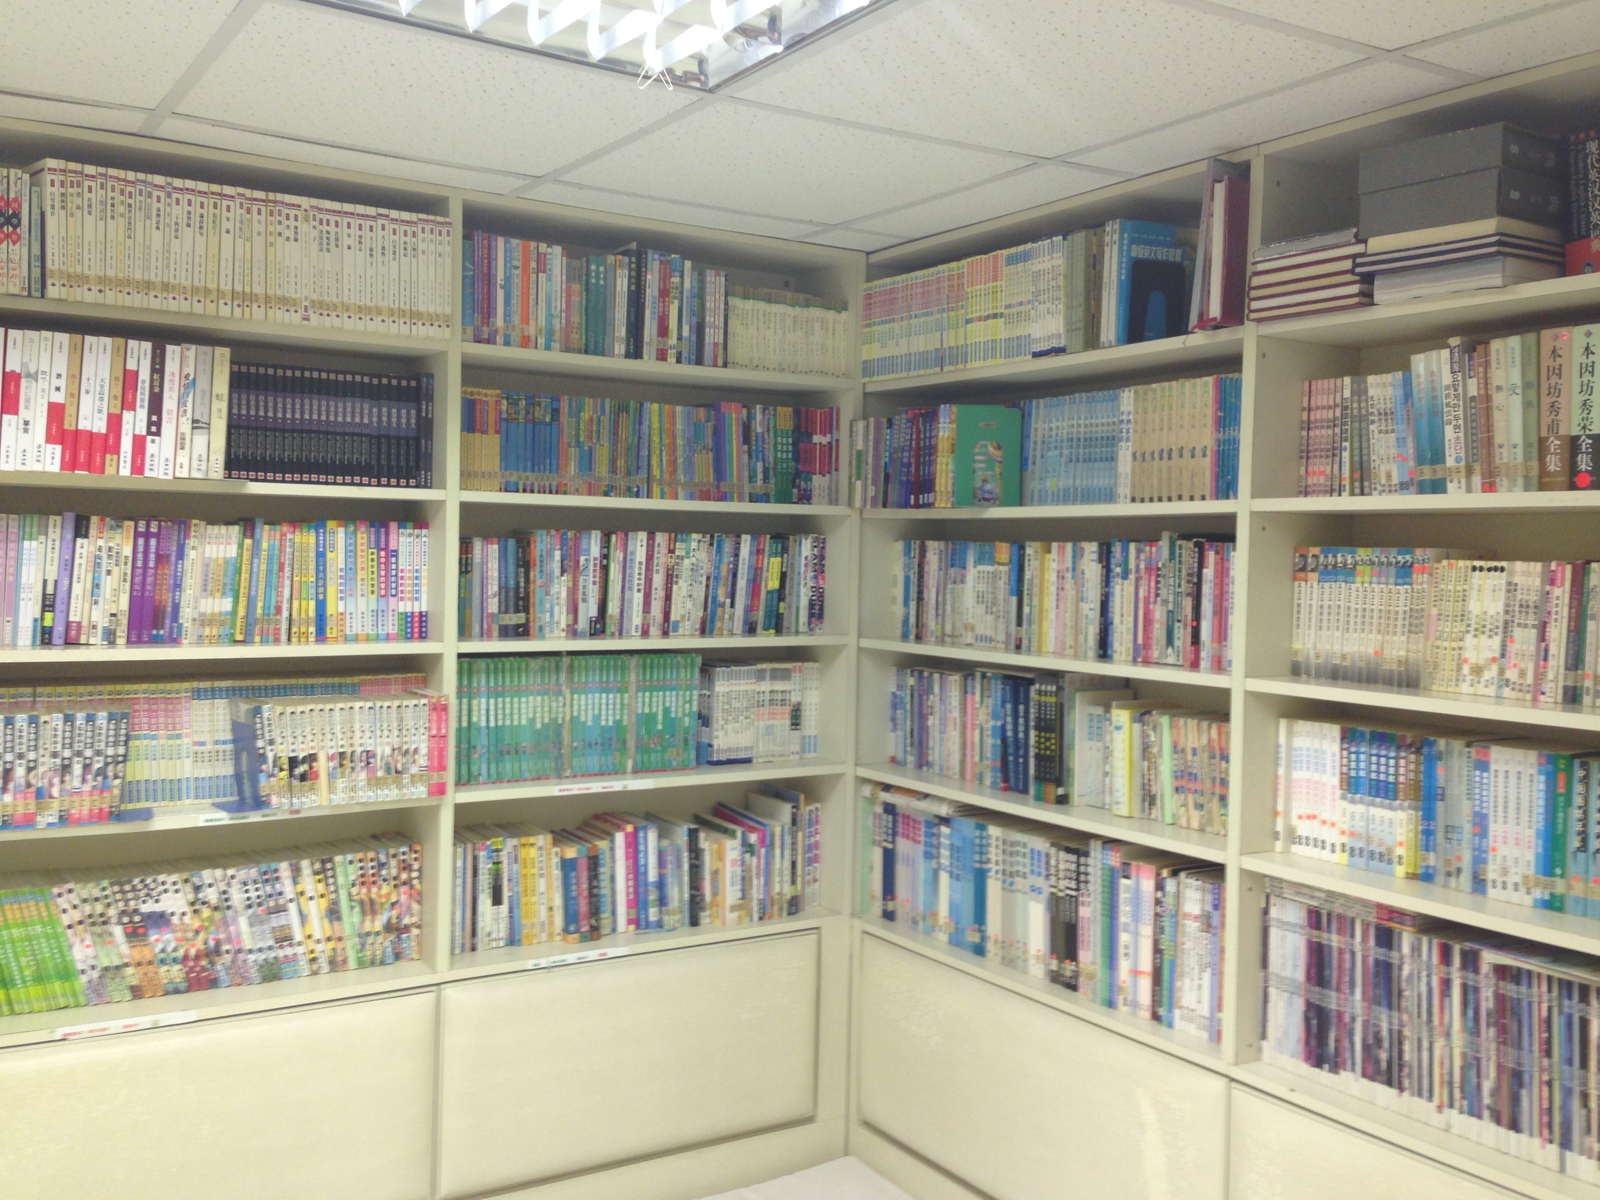 Isn't this massive? All Chinese books though! If only we had this many English go books....